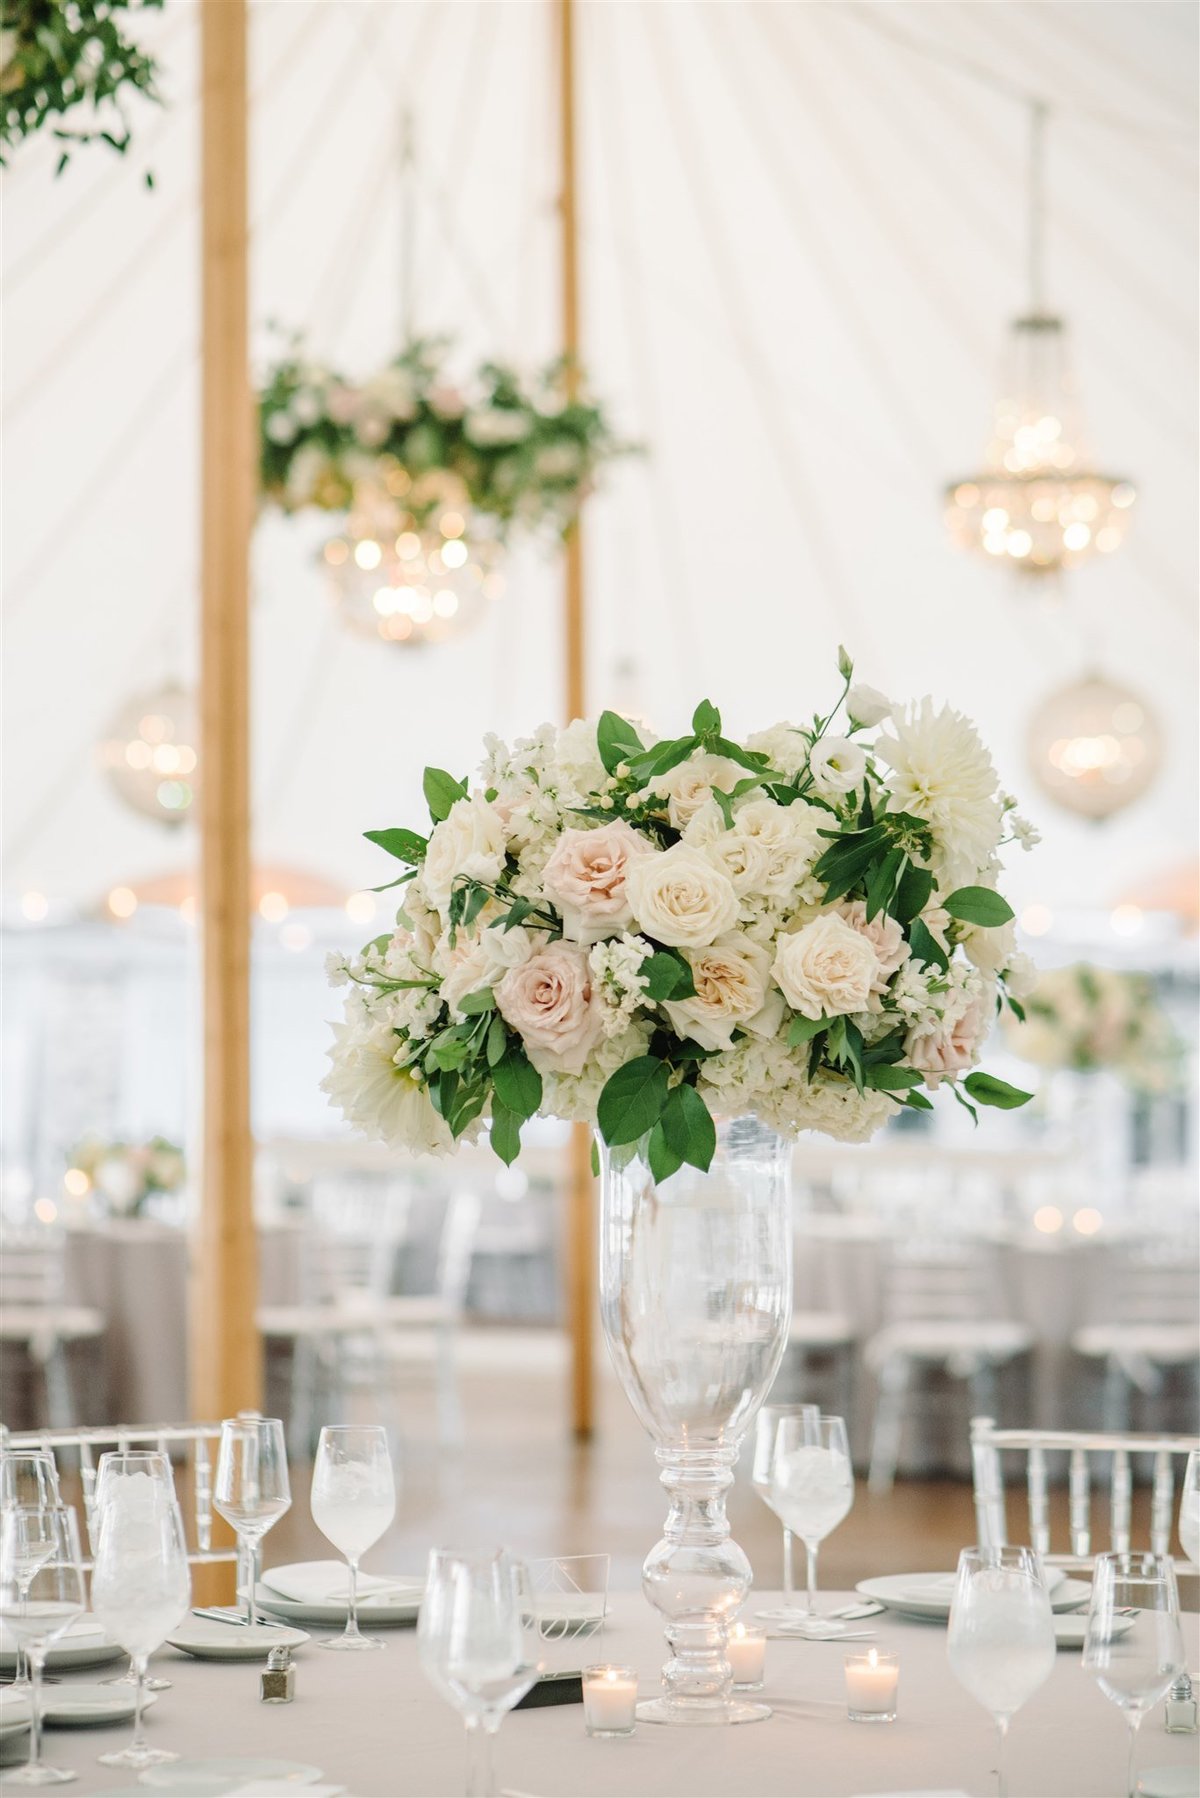 Cape Cod Tented Wedding for Tory and Ugo16